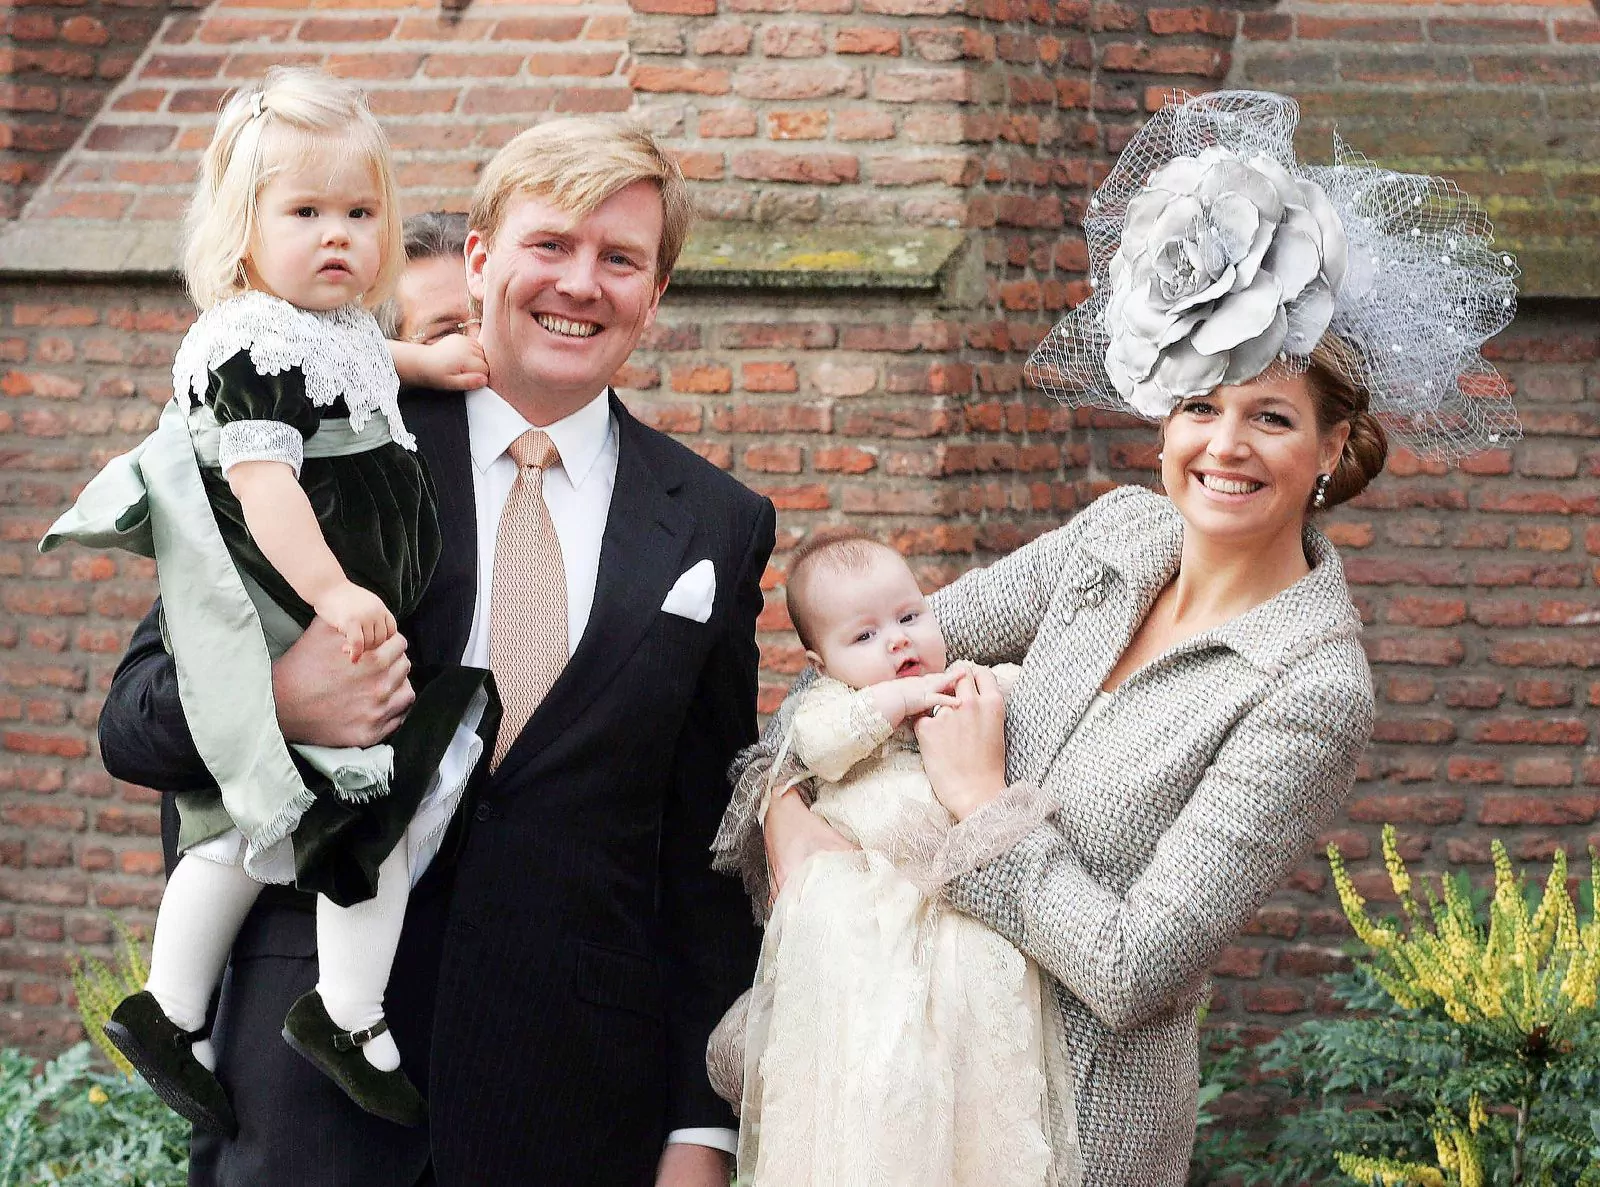 Prince Willem-Alexander and Princess Maxima at the christening ceremony of Princess Alexia in Wassenaar, 18 November 2005.